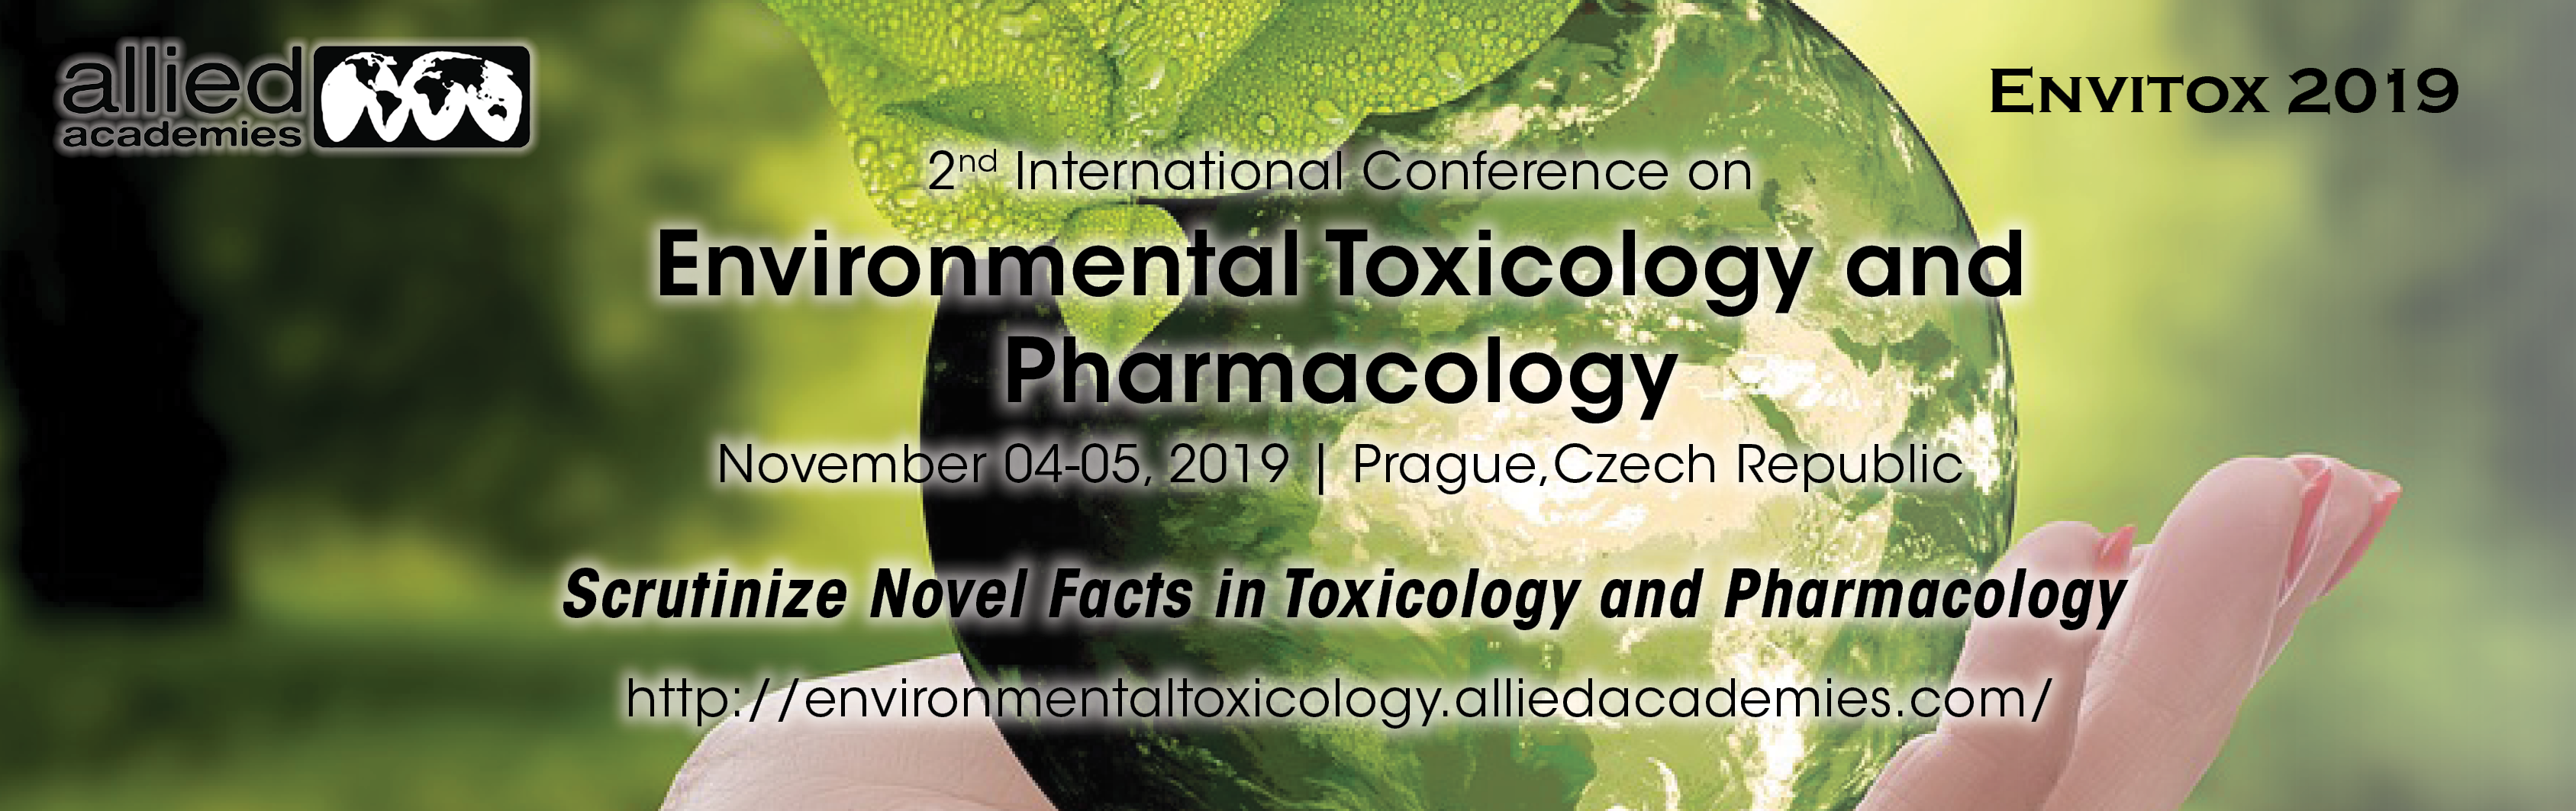 2nd International Conference on Environmental Toxicology and Pharmacology, Prague, Czech Republic